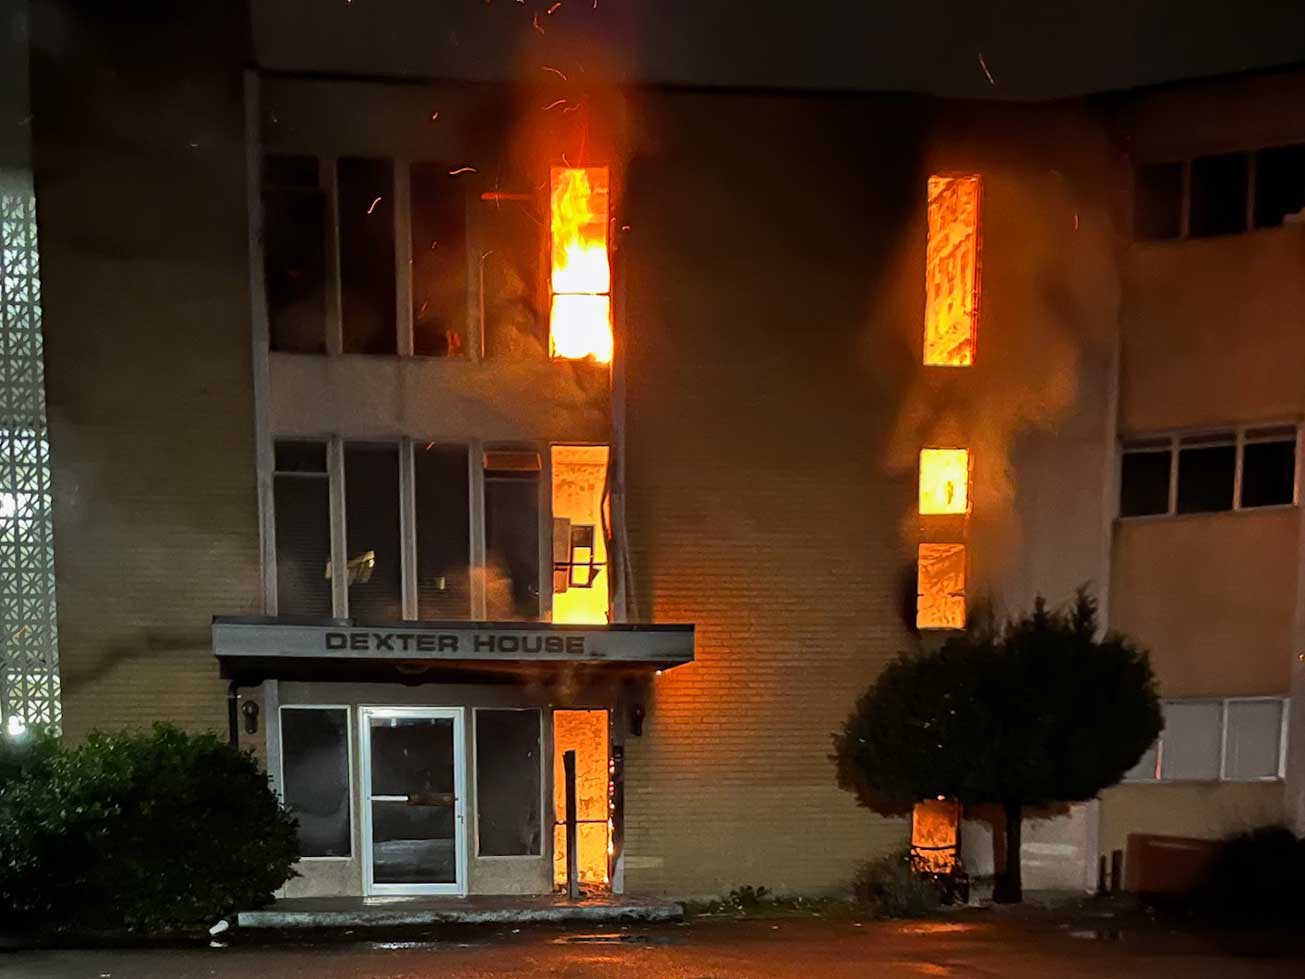 Fire in the main lobby and stairwell of an apartment building in the Westlake neighborhood.